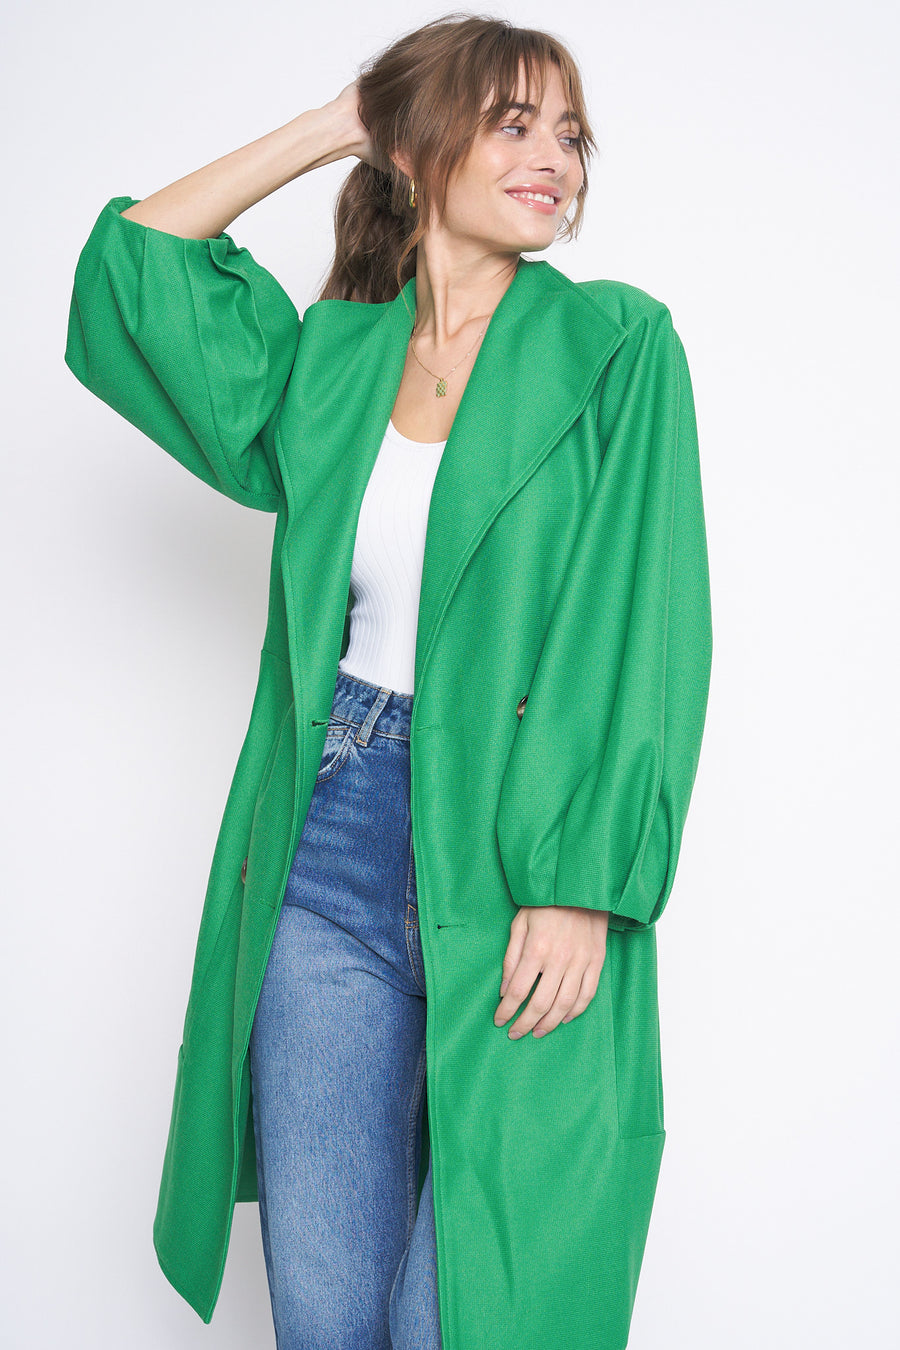 No Srcipt image - Images of 3 of 6 Pleated Long Sleeve Poppy Bright Green Color Long Knit Jacket Double Breasted Puff Sleeves Workwear Officewear Stylish Womens Fashion Style Outerwear Long Jacket Oversized Vintage Inspired Design 